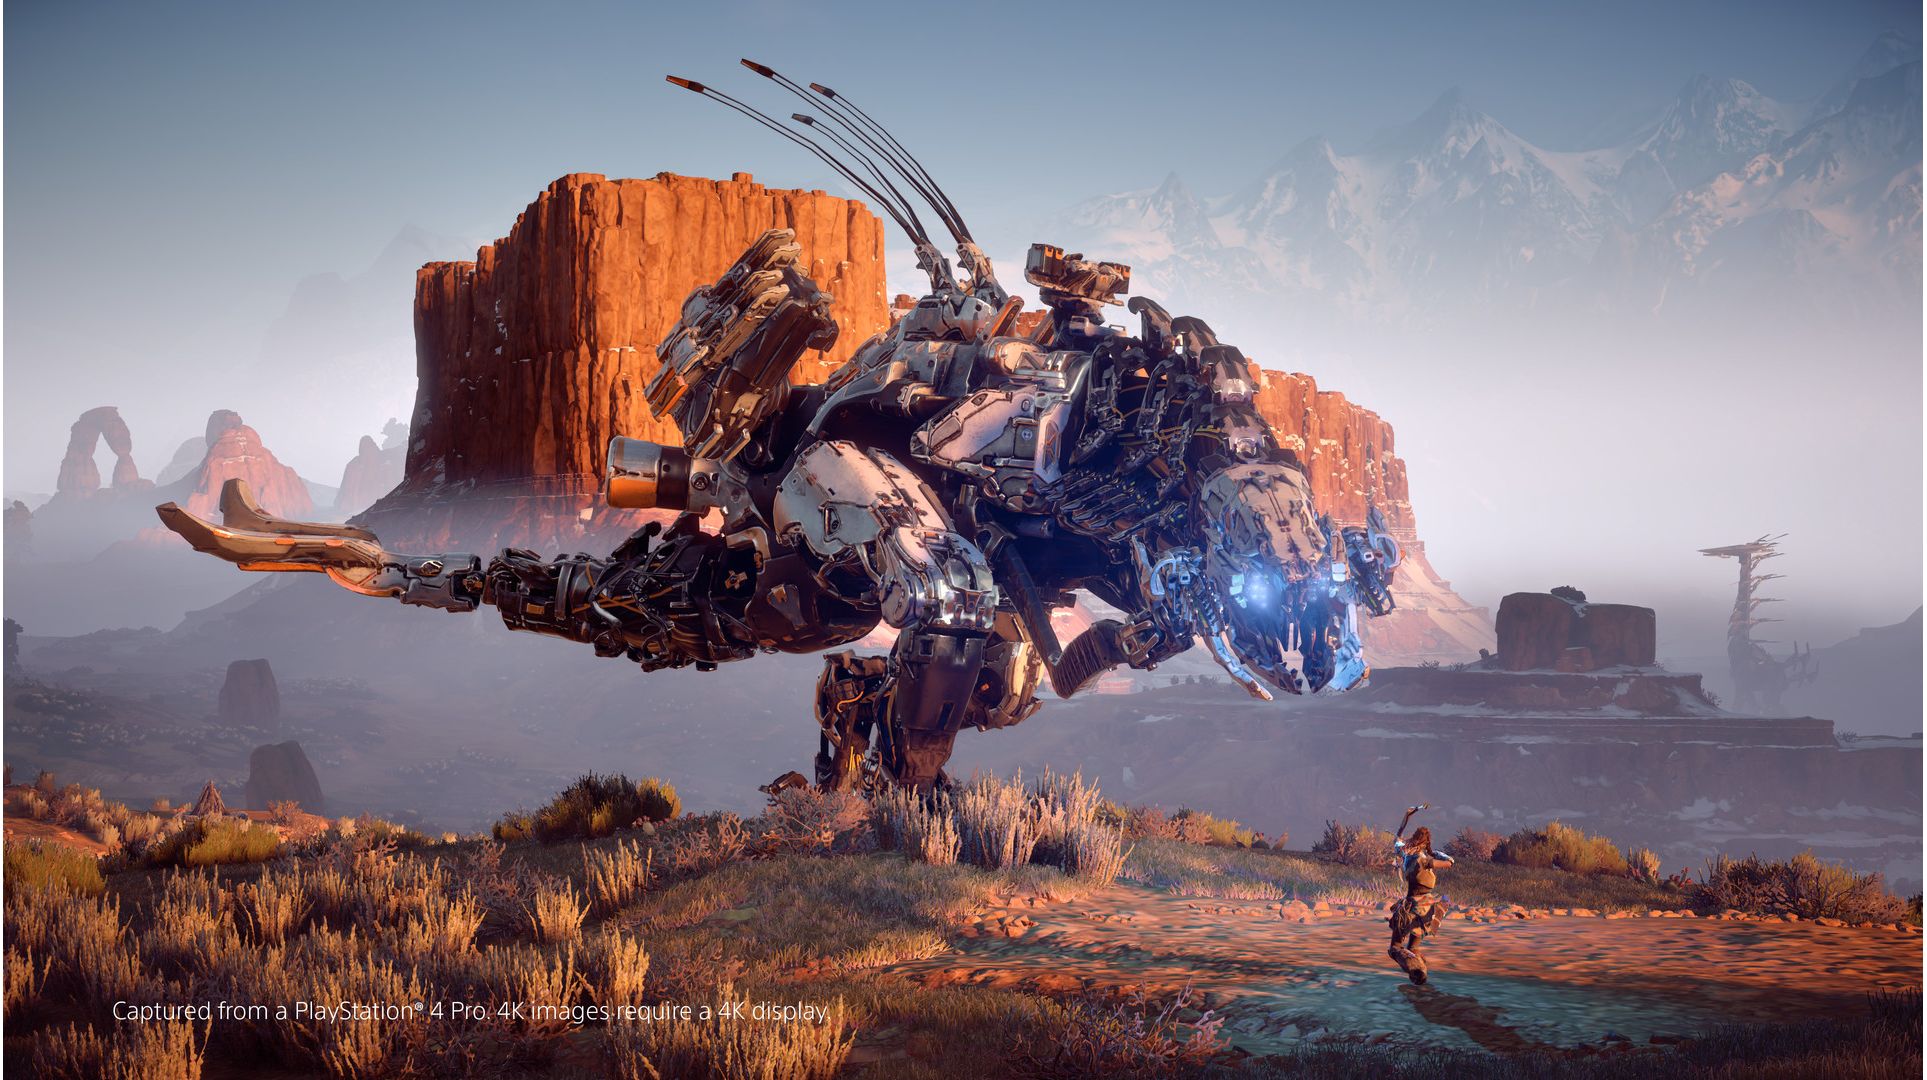 Buy Horizon Zero Dawn Complete Edition from the Humble Store